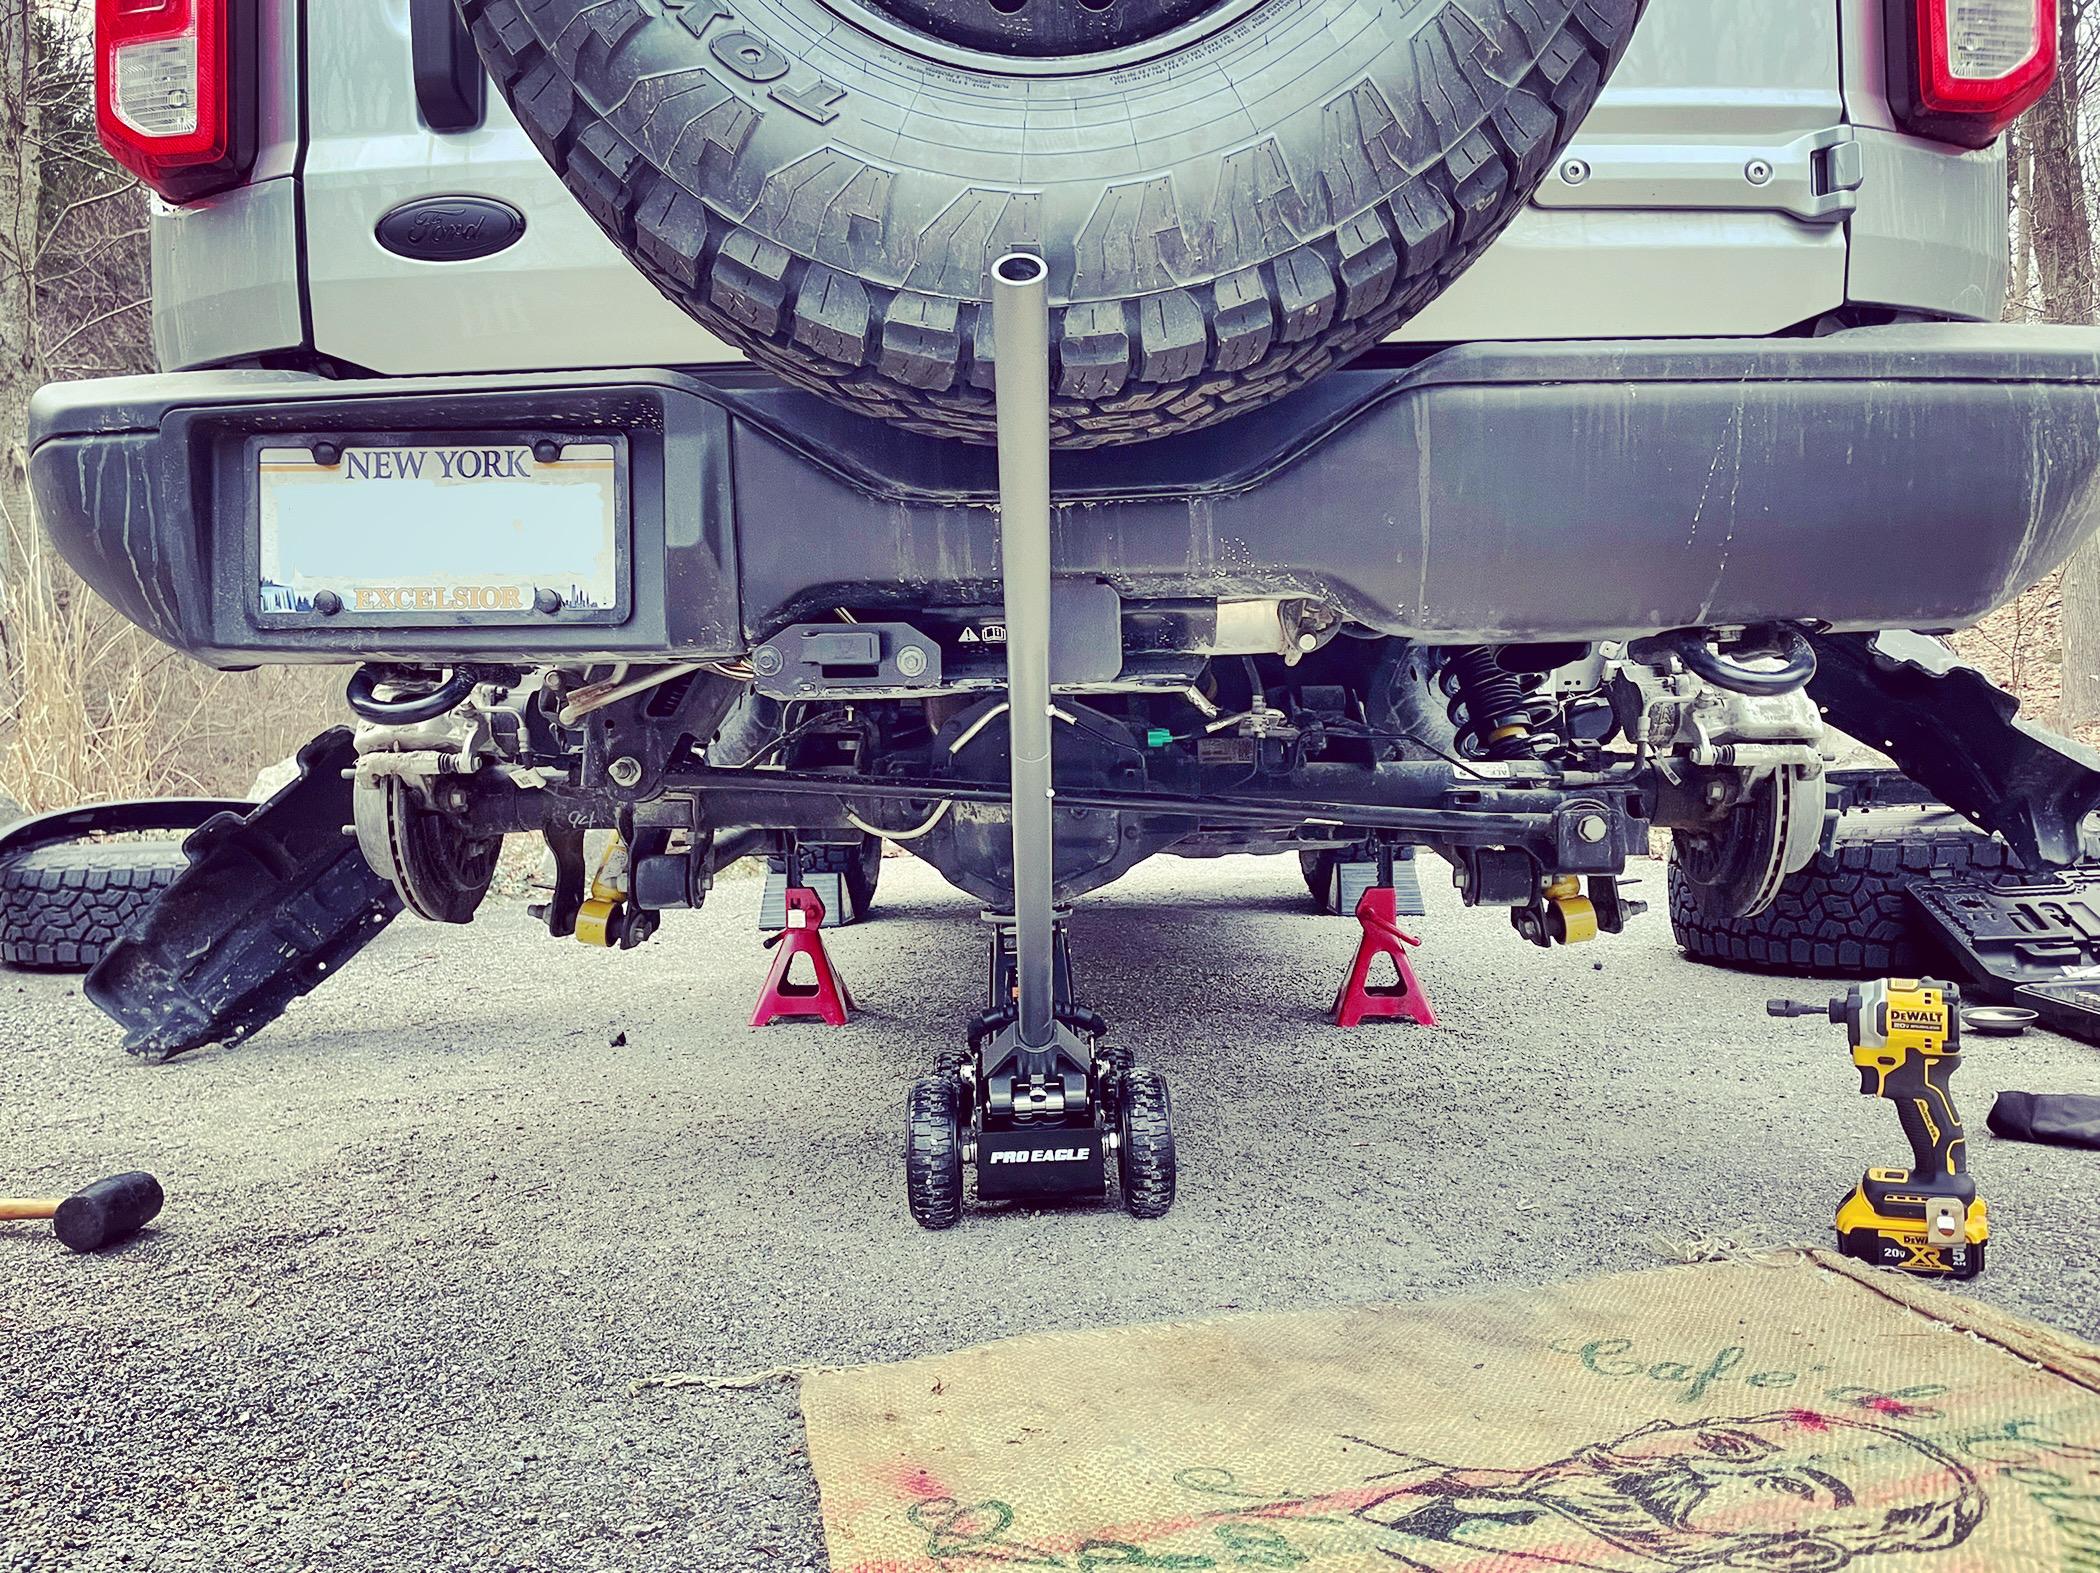 Ford Bronco Bronco Sasquatch suspension parts (shocks & springs) price quoted at $1300 from dealer parts department 20C111F4-18E7-44A6-938E-BAD564AAF319